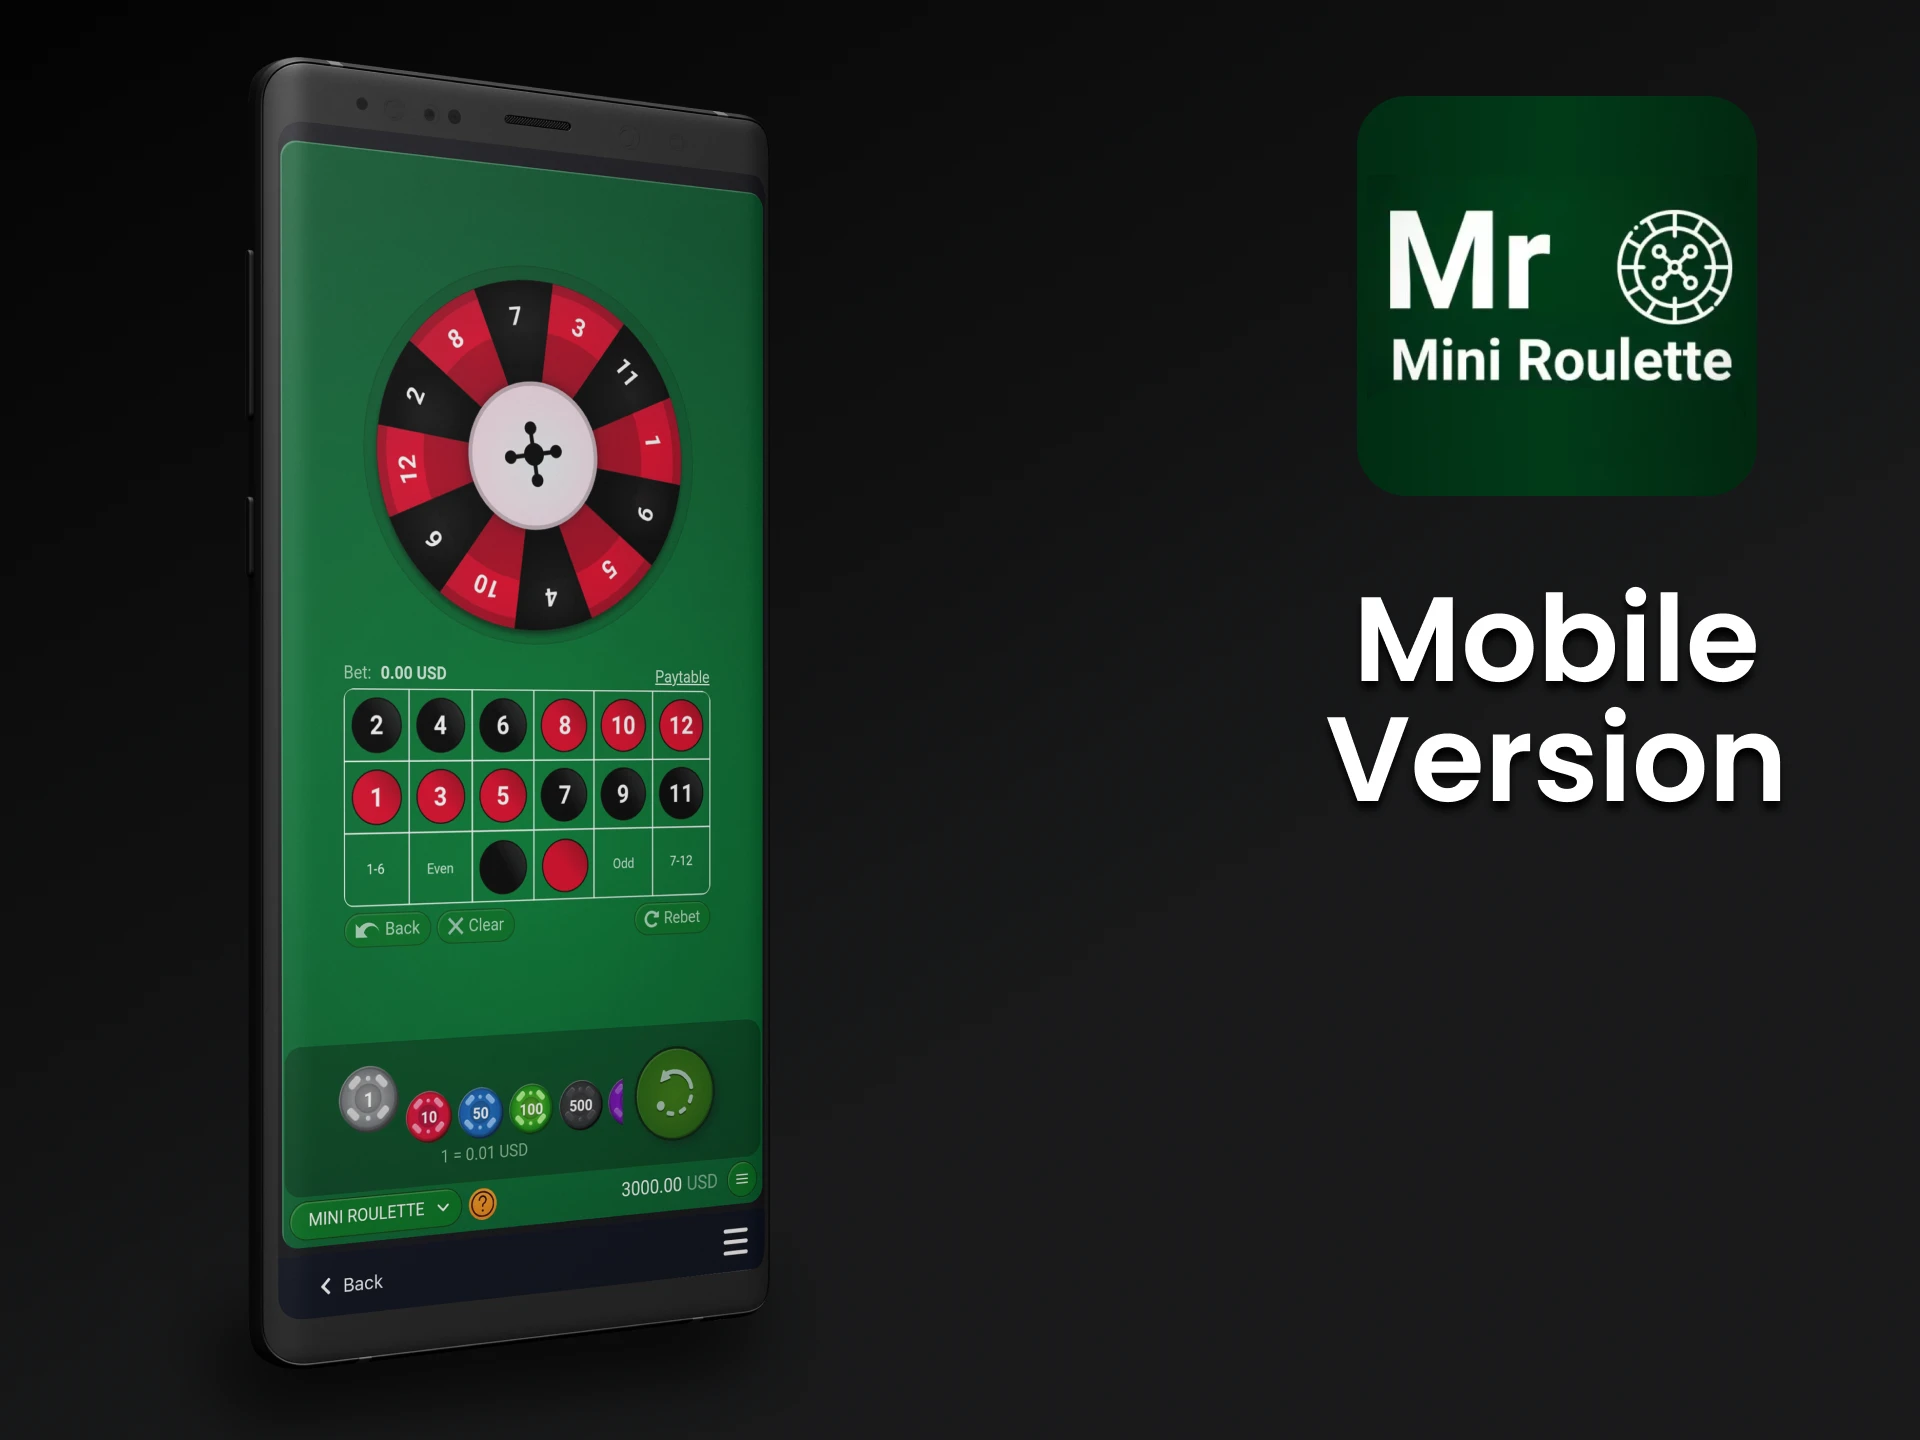 Download the application to play Mini Roulette.